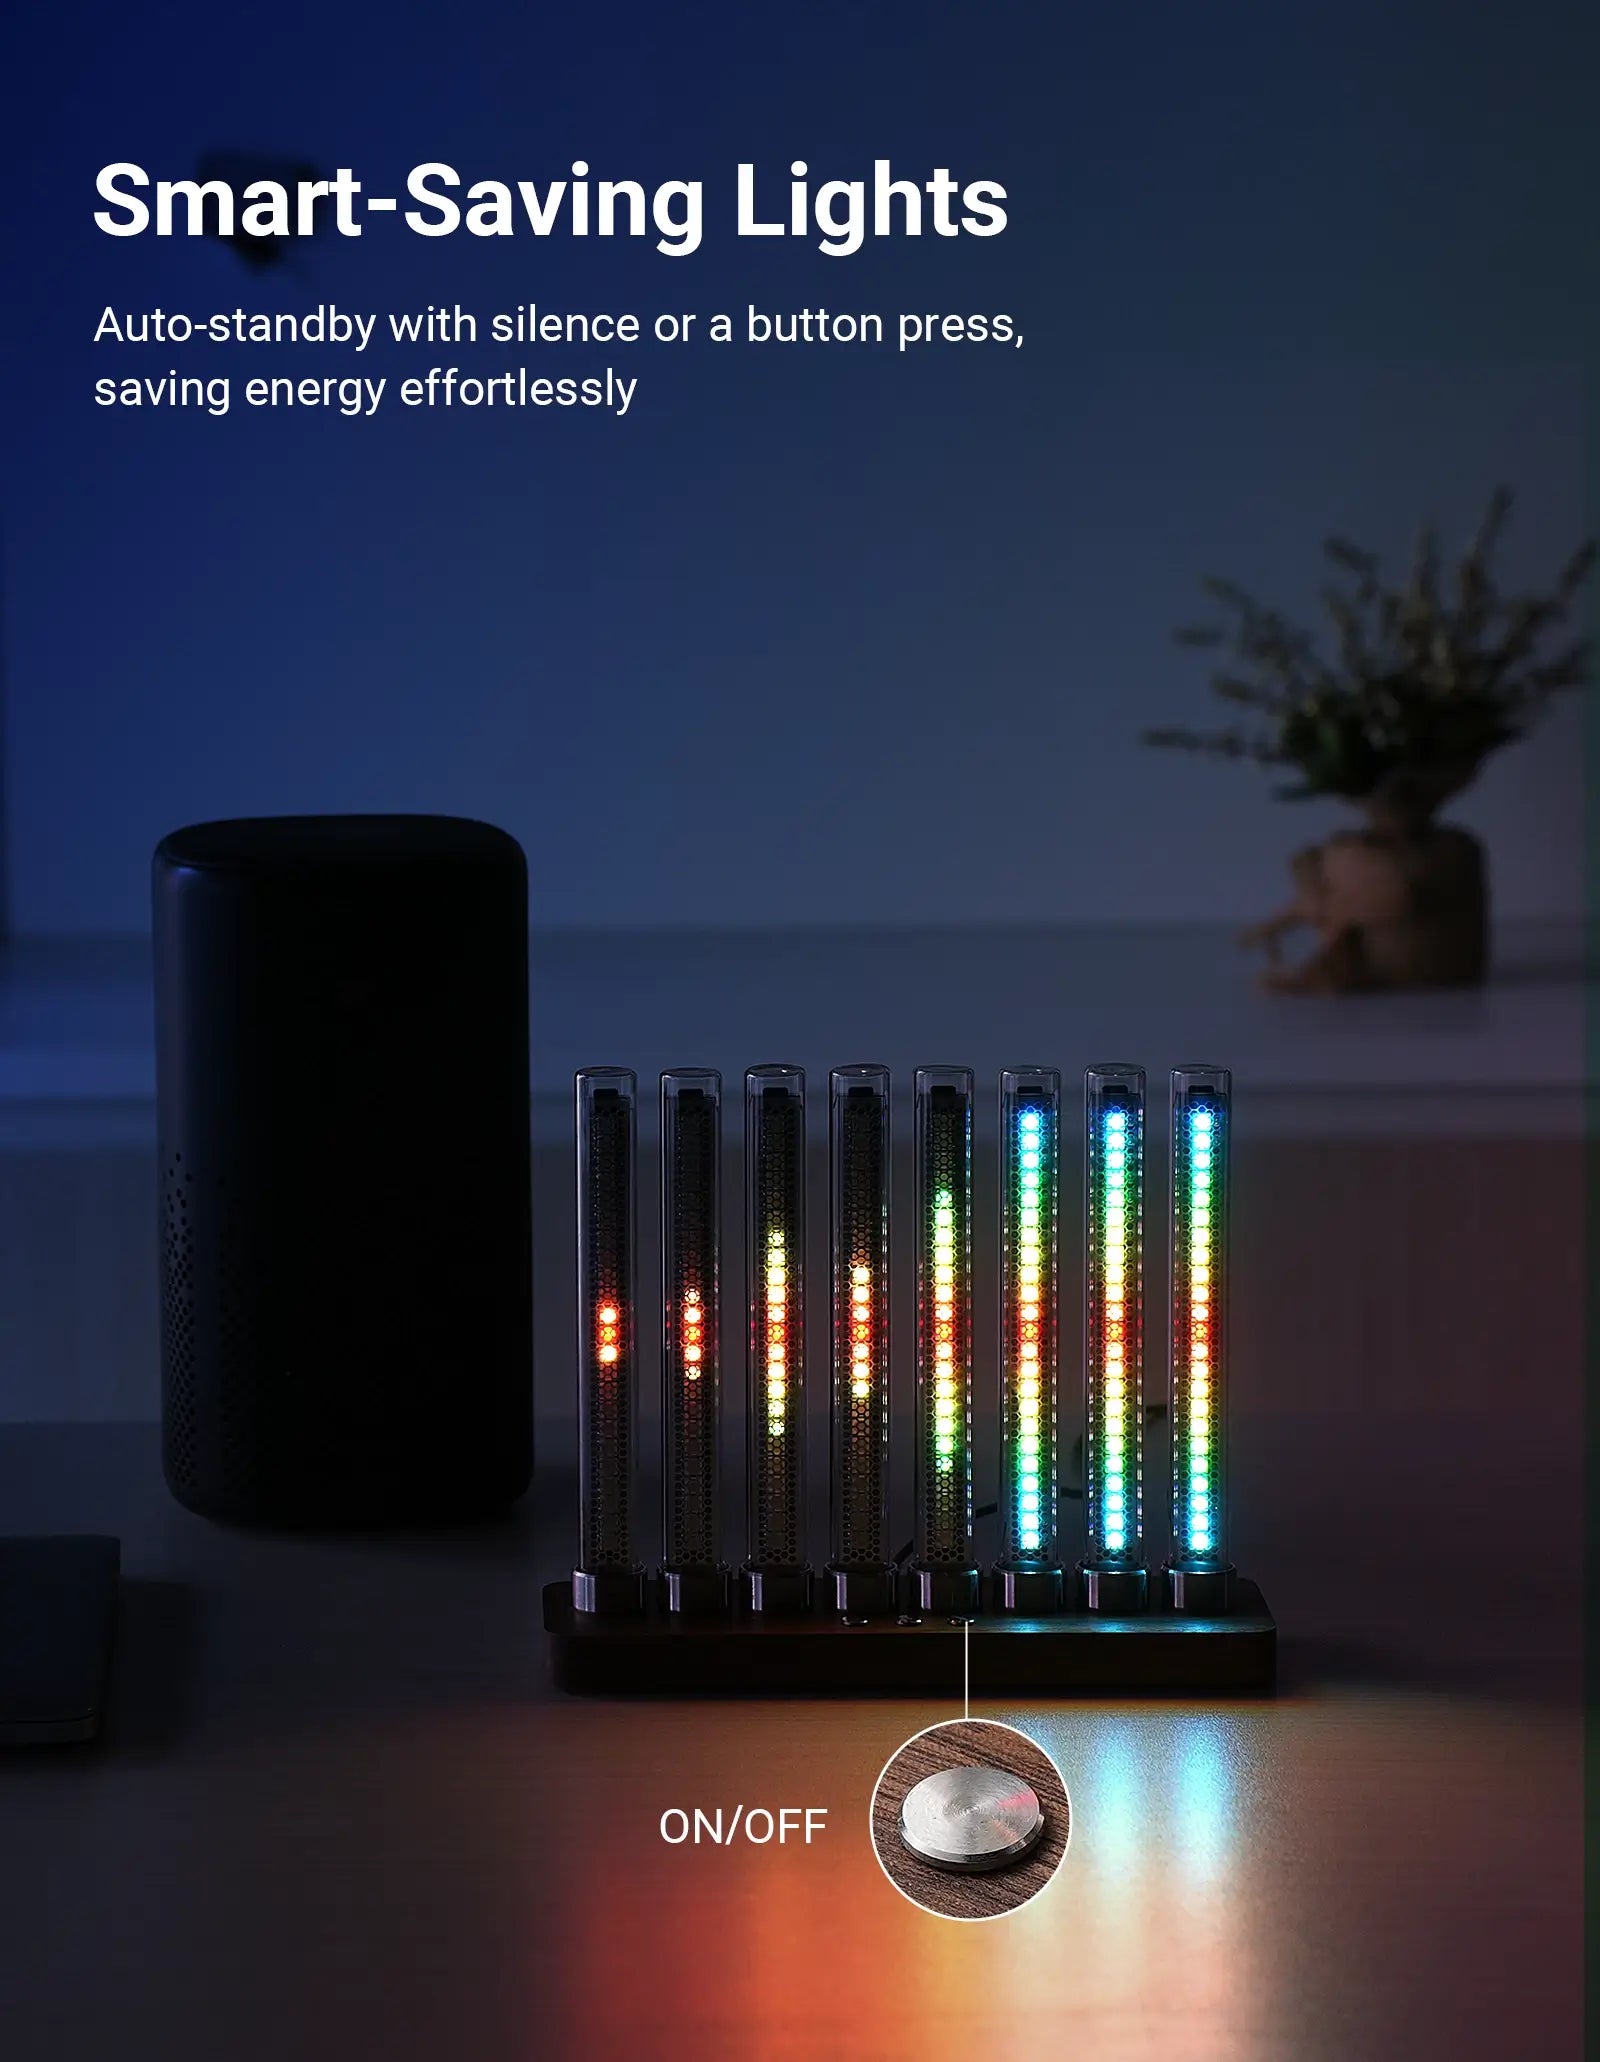 Nixie RGB Music Spectrum Light Bar with Ambient Lighting for Gaming Setup